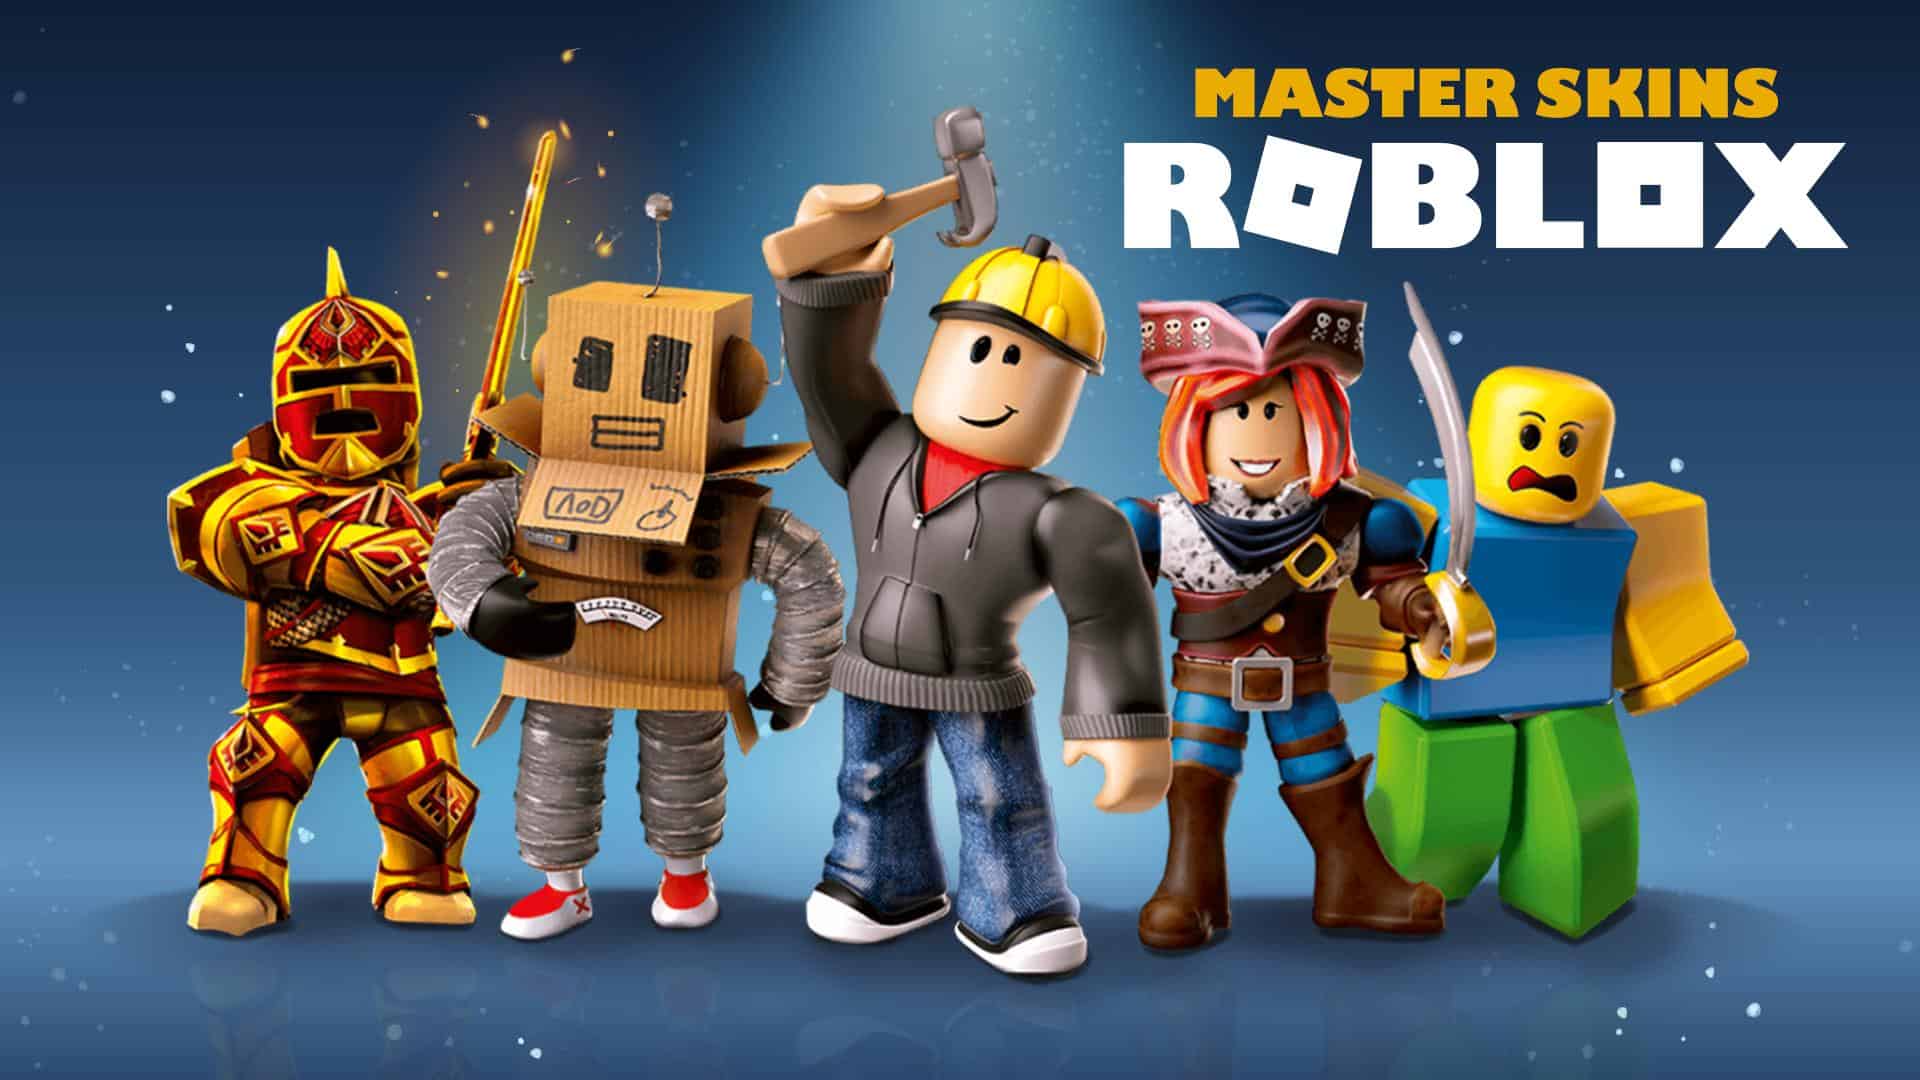 How to download Roblox 2021 for PC in easy and simple steps